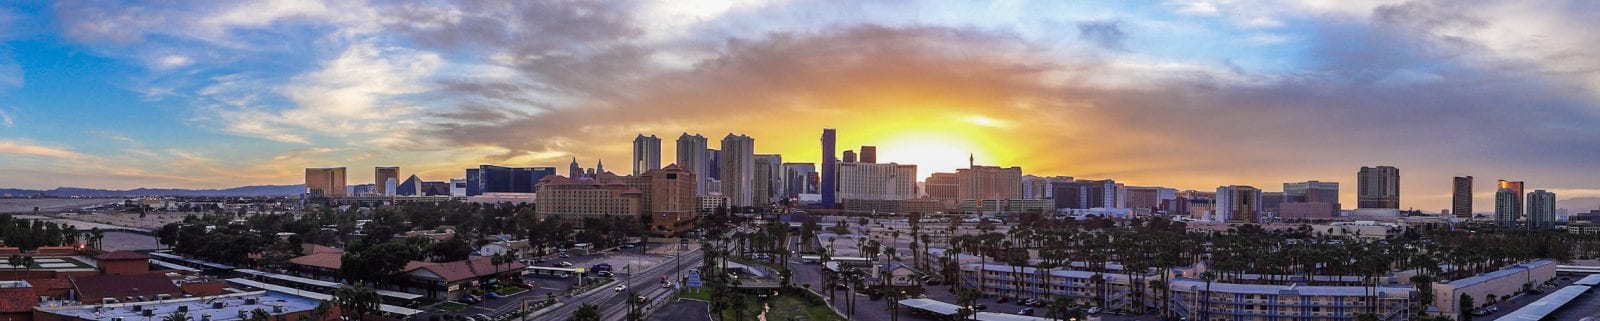 wide angle shot of the Las Vegas strip at sunset